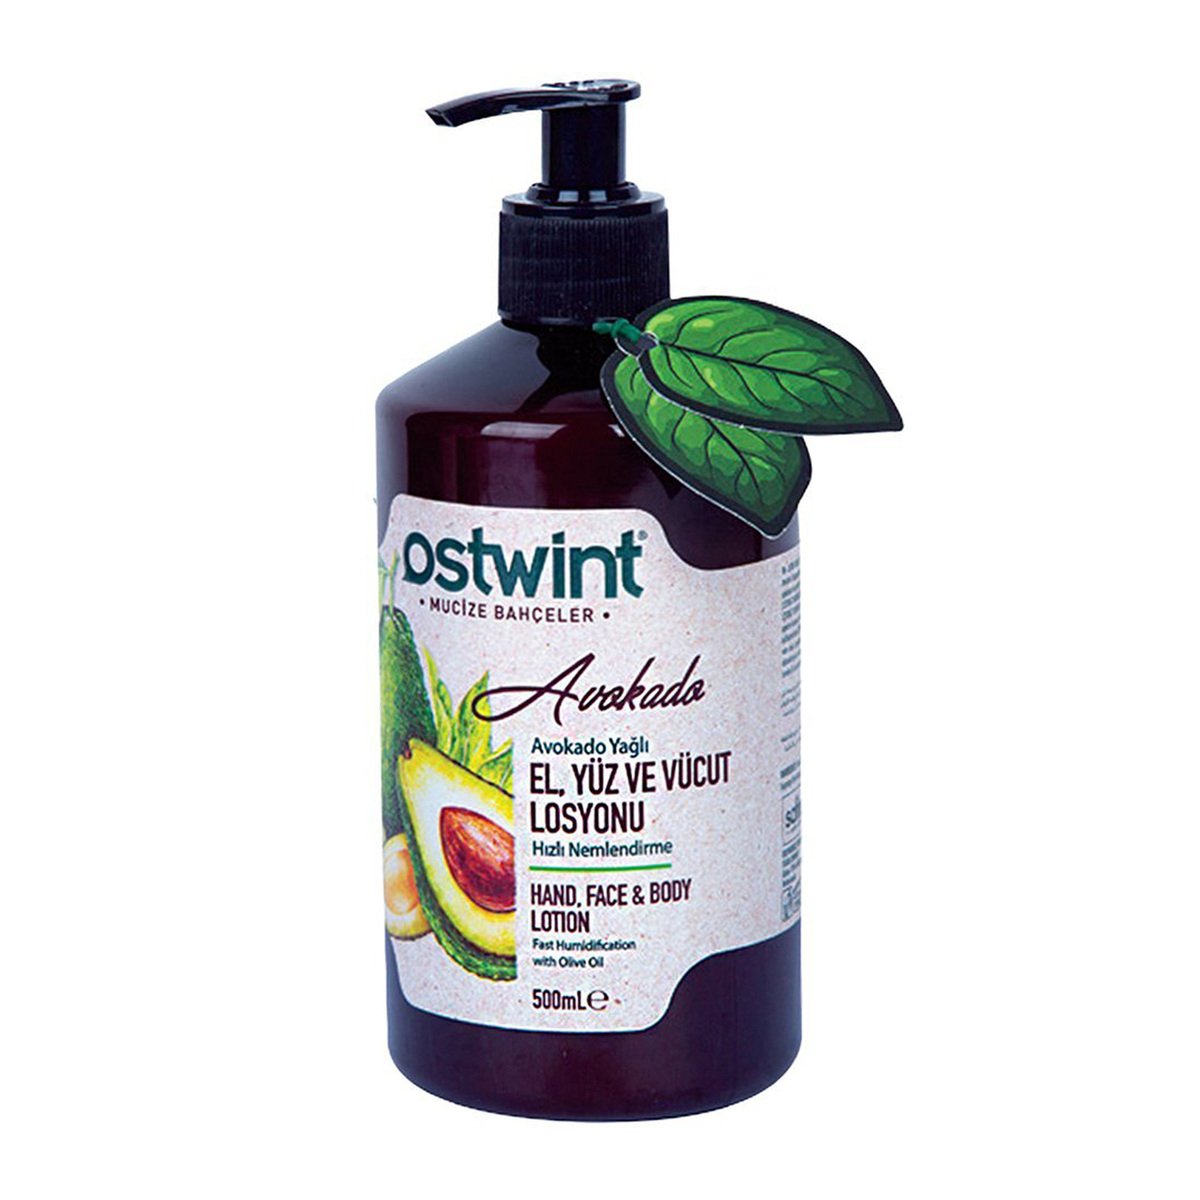 Ostwint Avocado Hand, Face & Body Lotion 500 ml